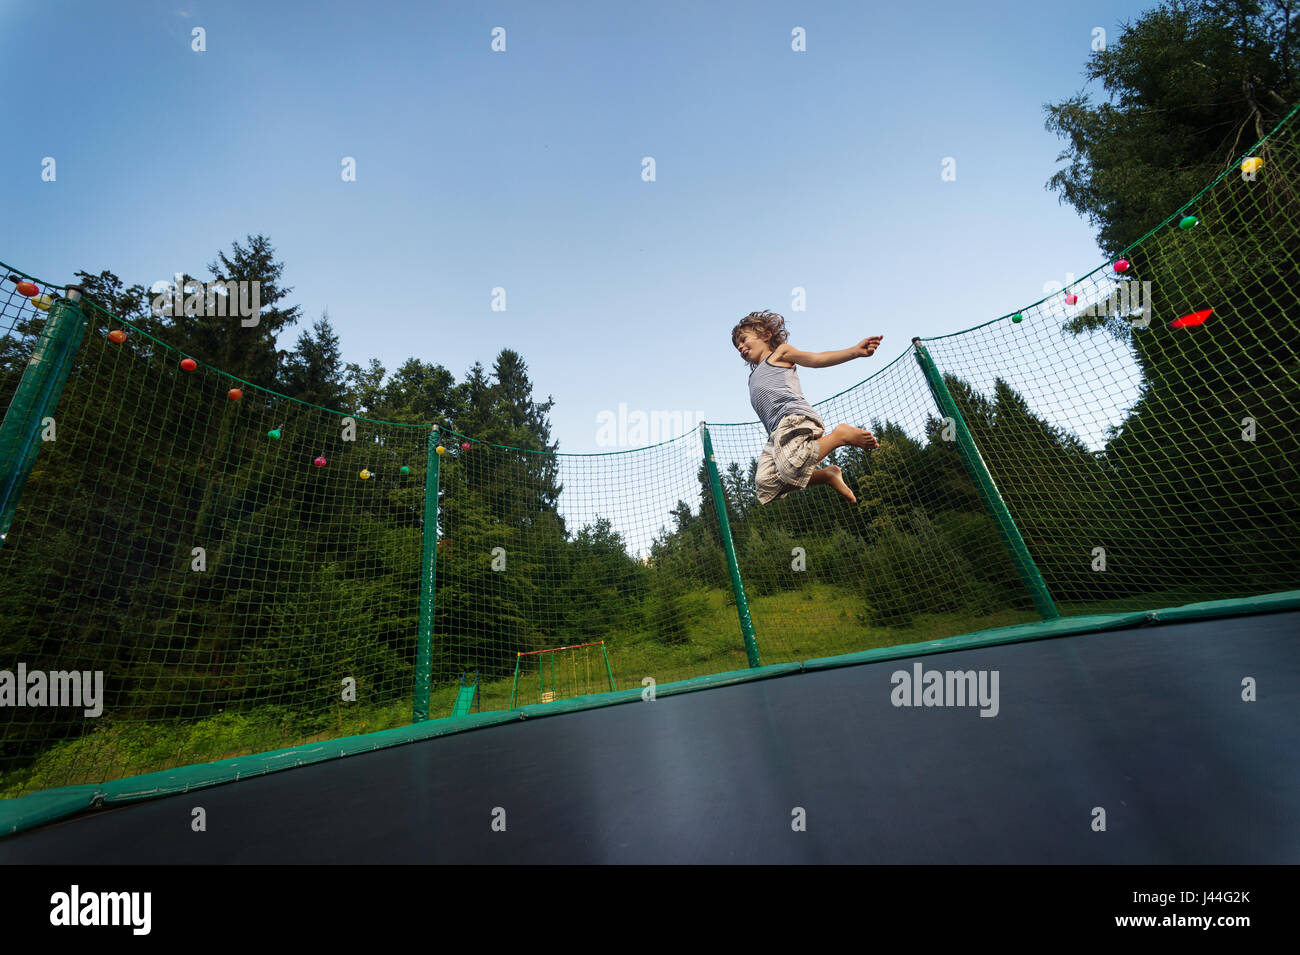 Cute boy enjoys jumping and bouncing on trampoline oudoors. Stock Photo